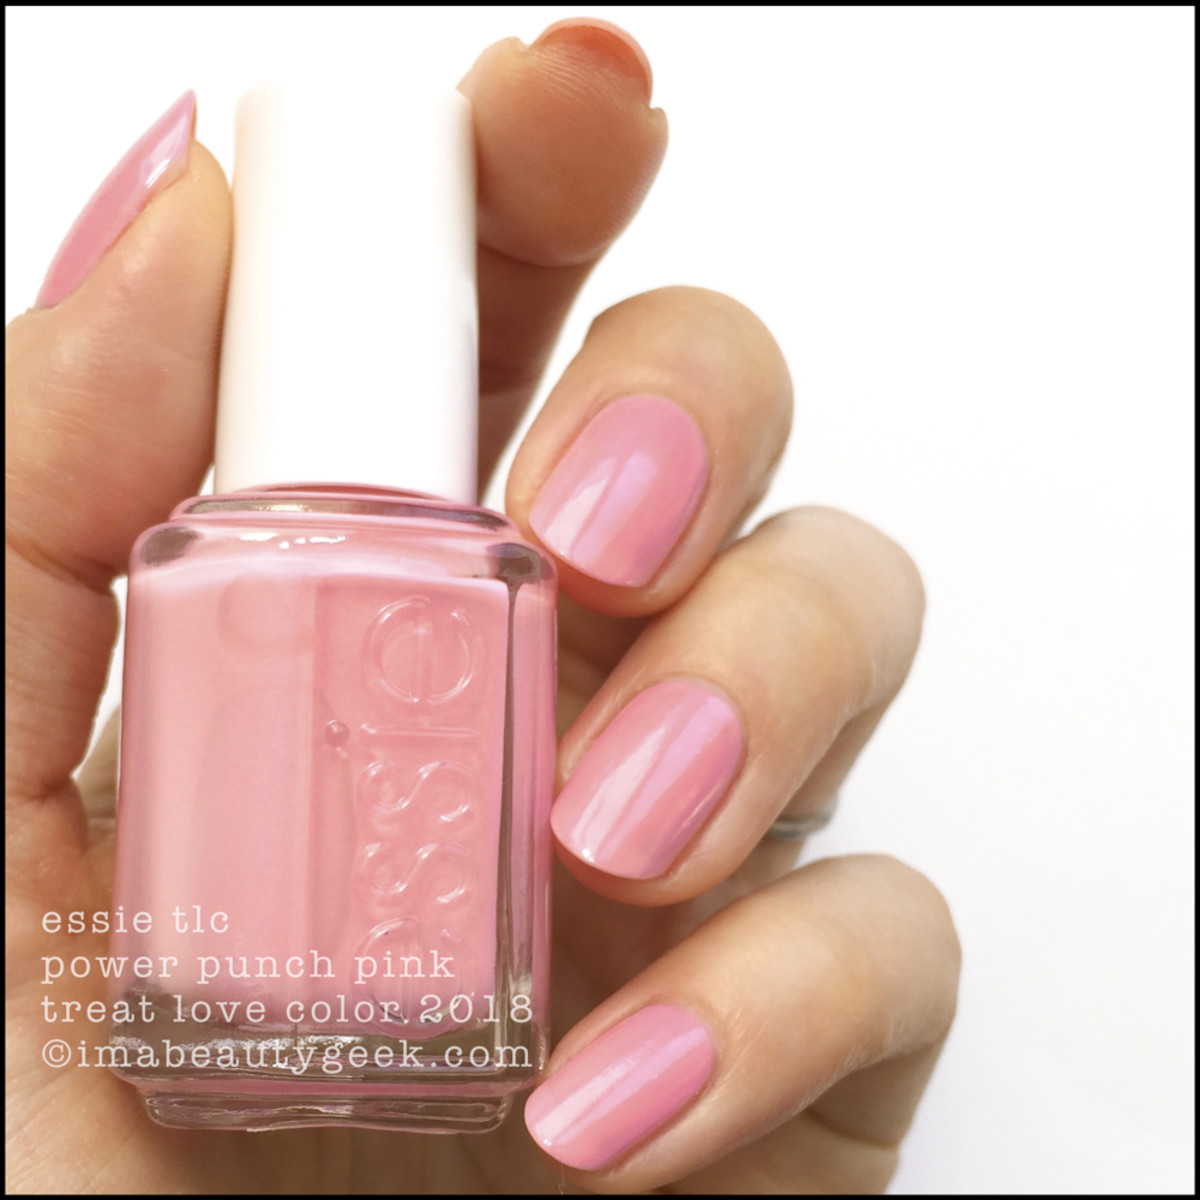 Essie TLC Power Punch Pink _ Essie Treat Love Color Swatches 2018 Shade Expansion